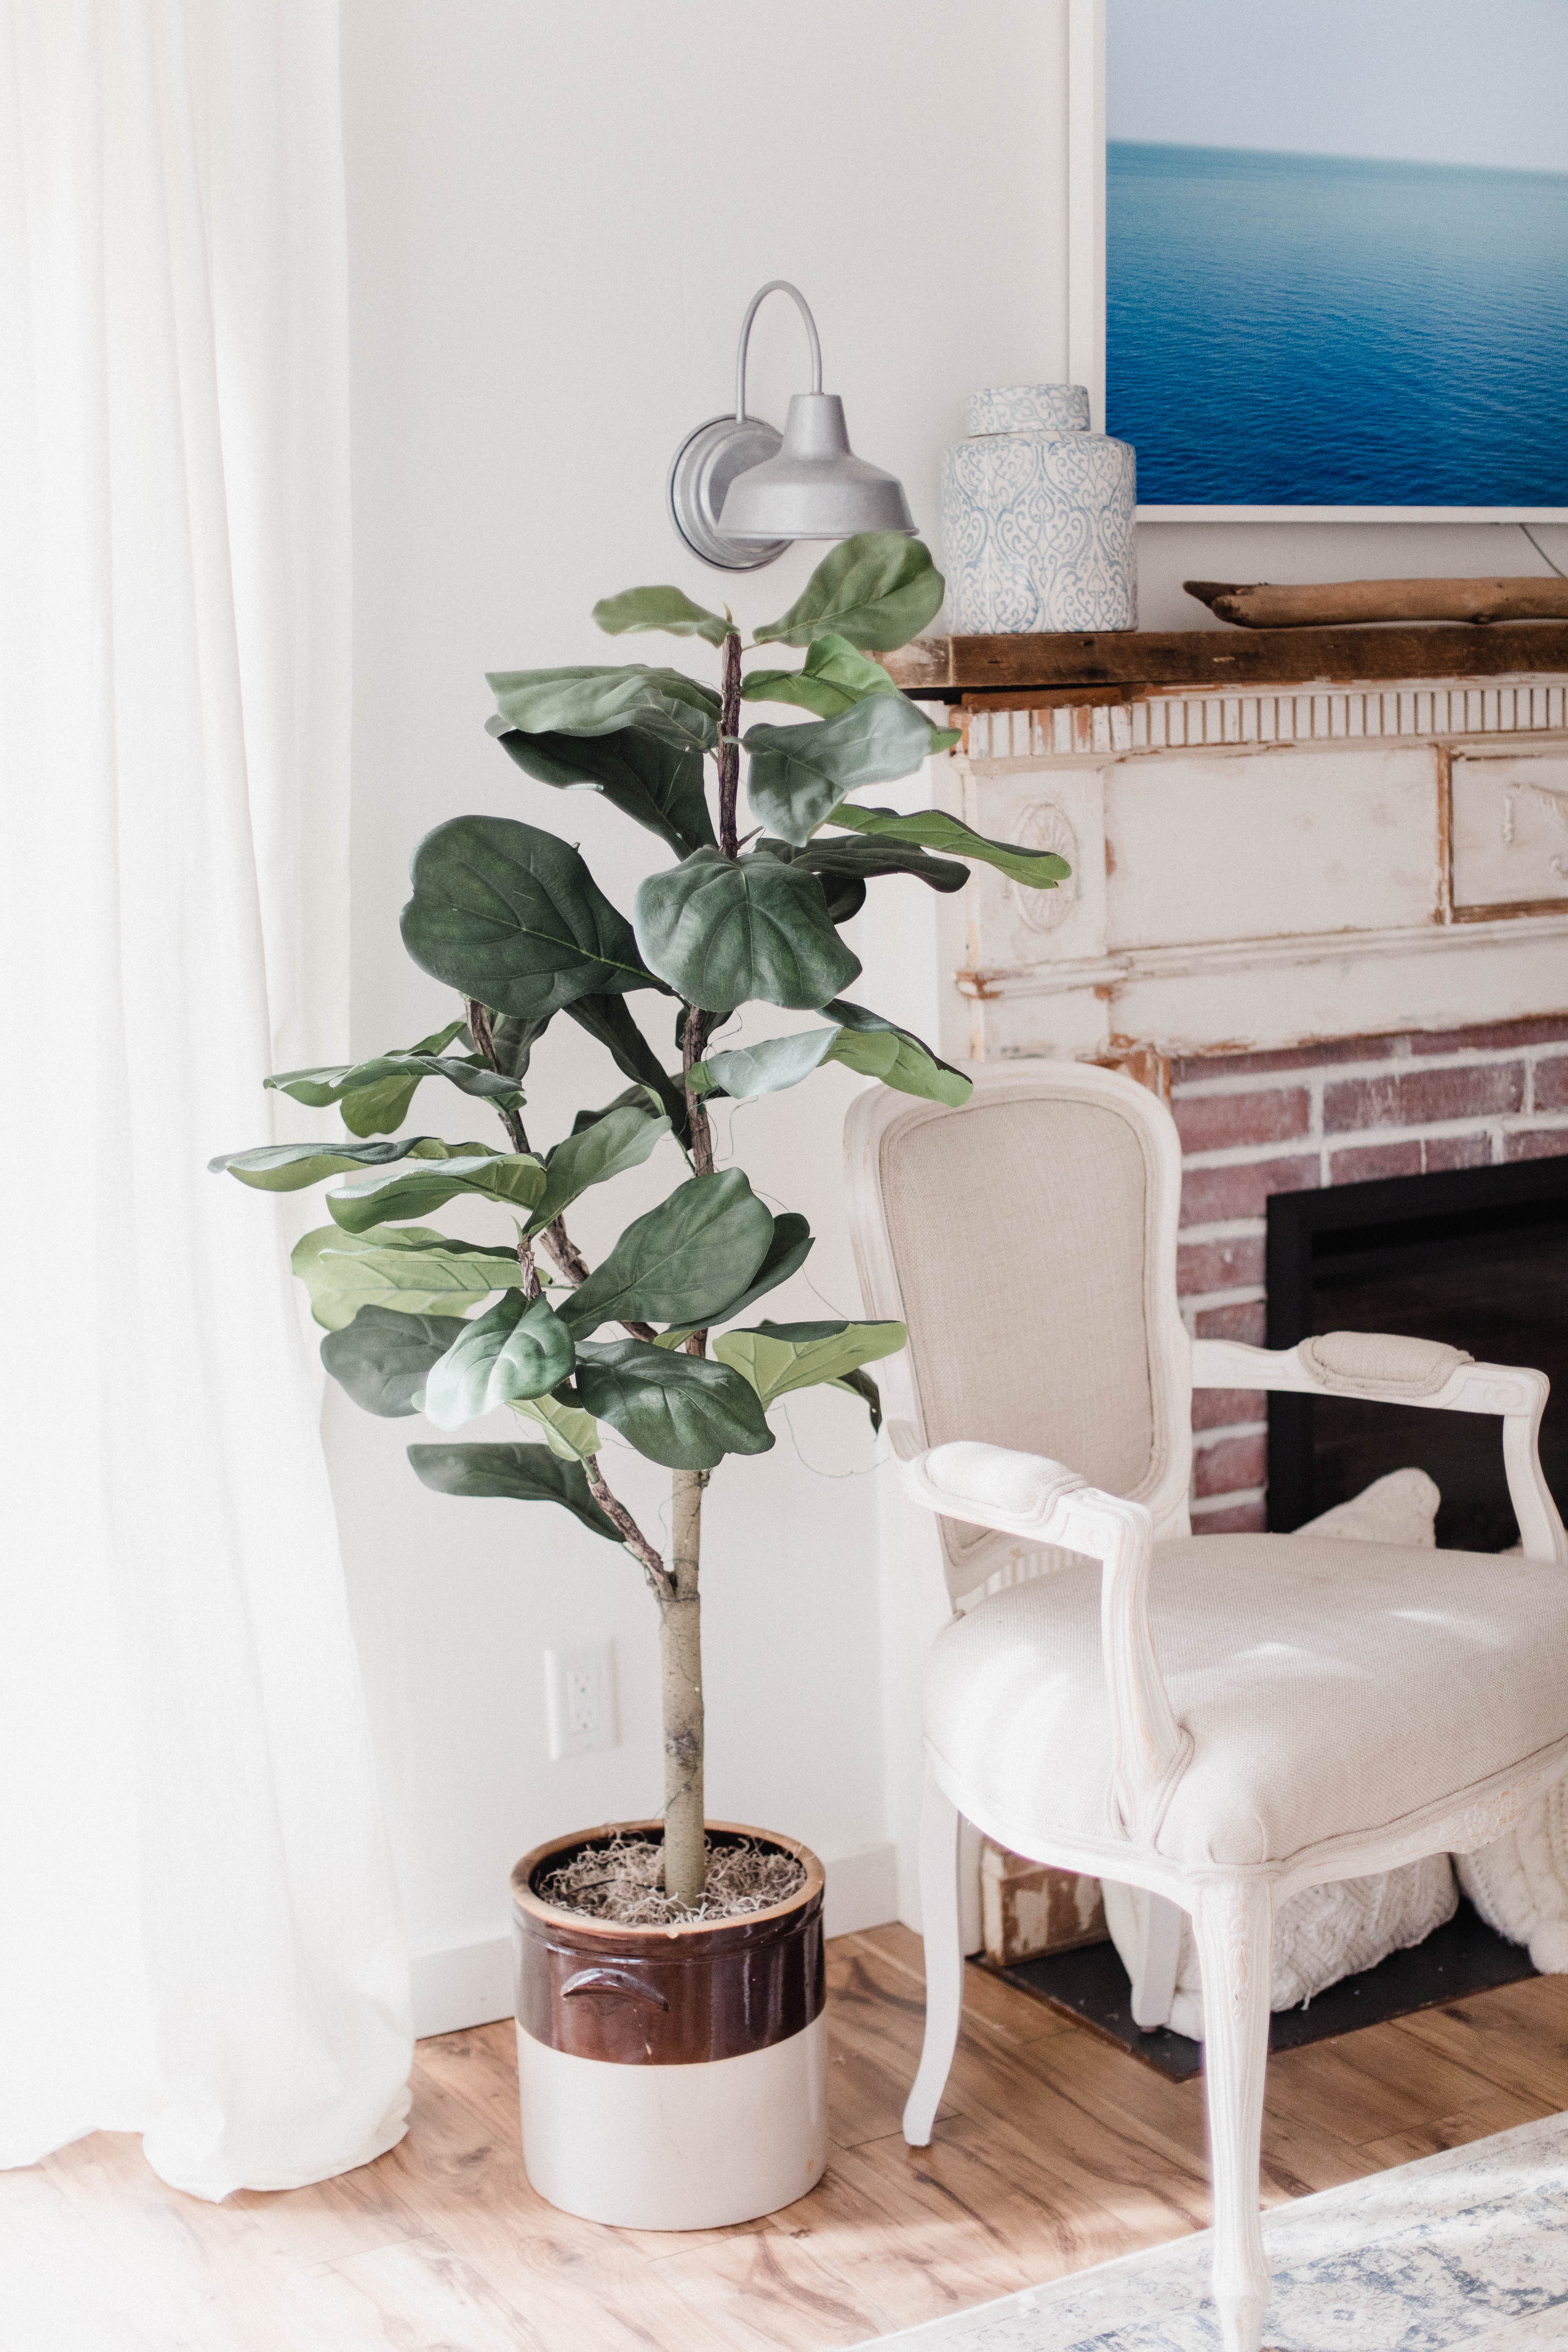 Connecticut life and style blogger Lauren McBride shares her January QVC Finds including a faux fiddle leaf fit, beauty deals, and cozy options.